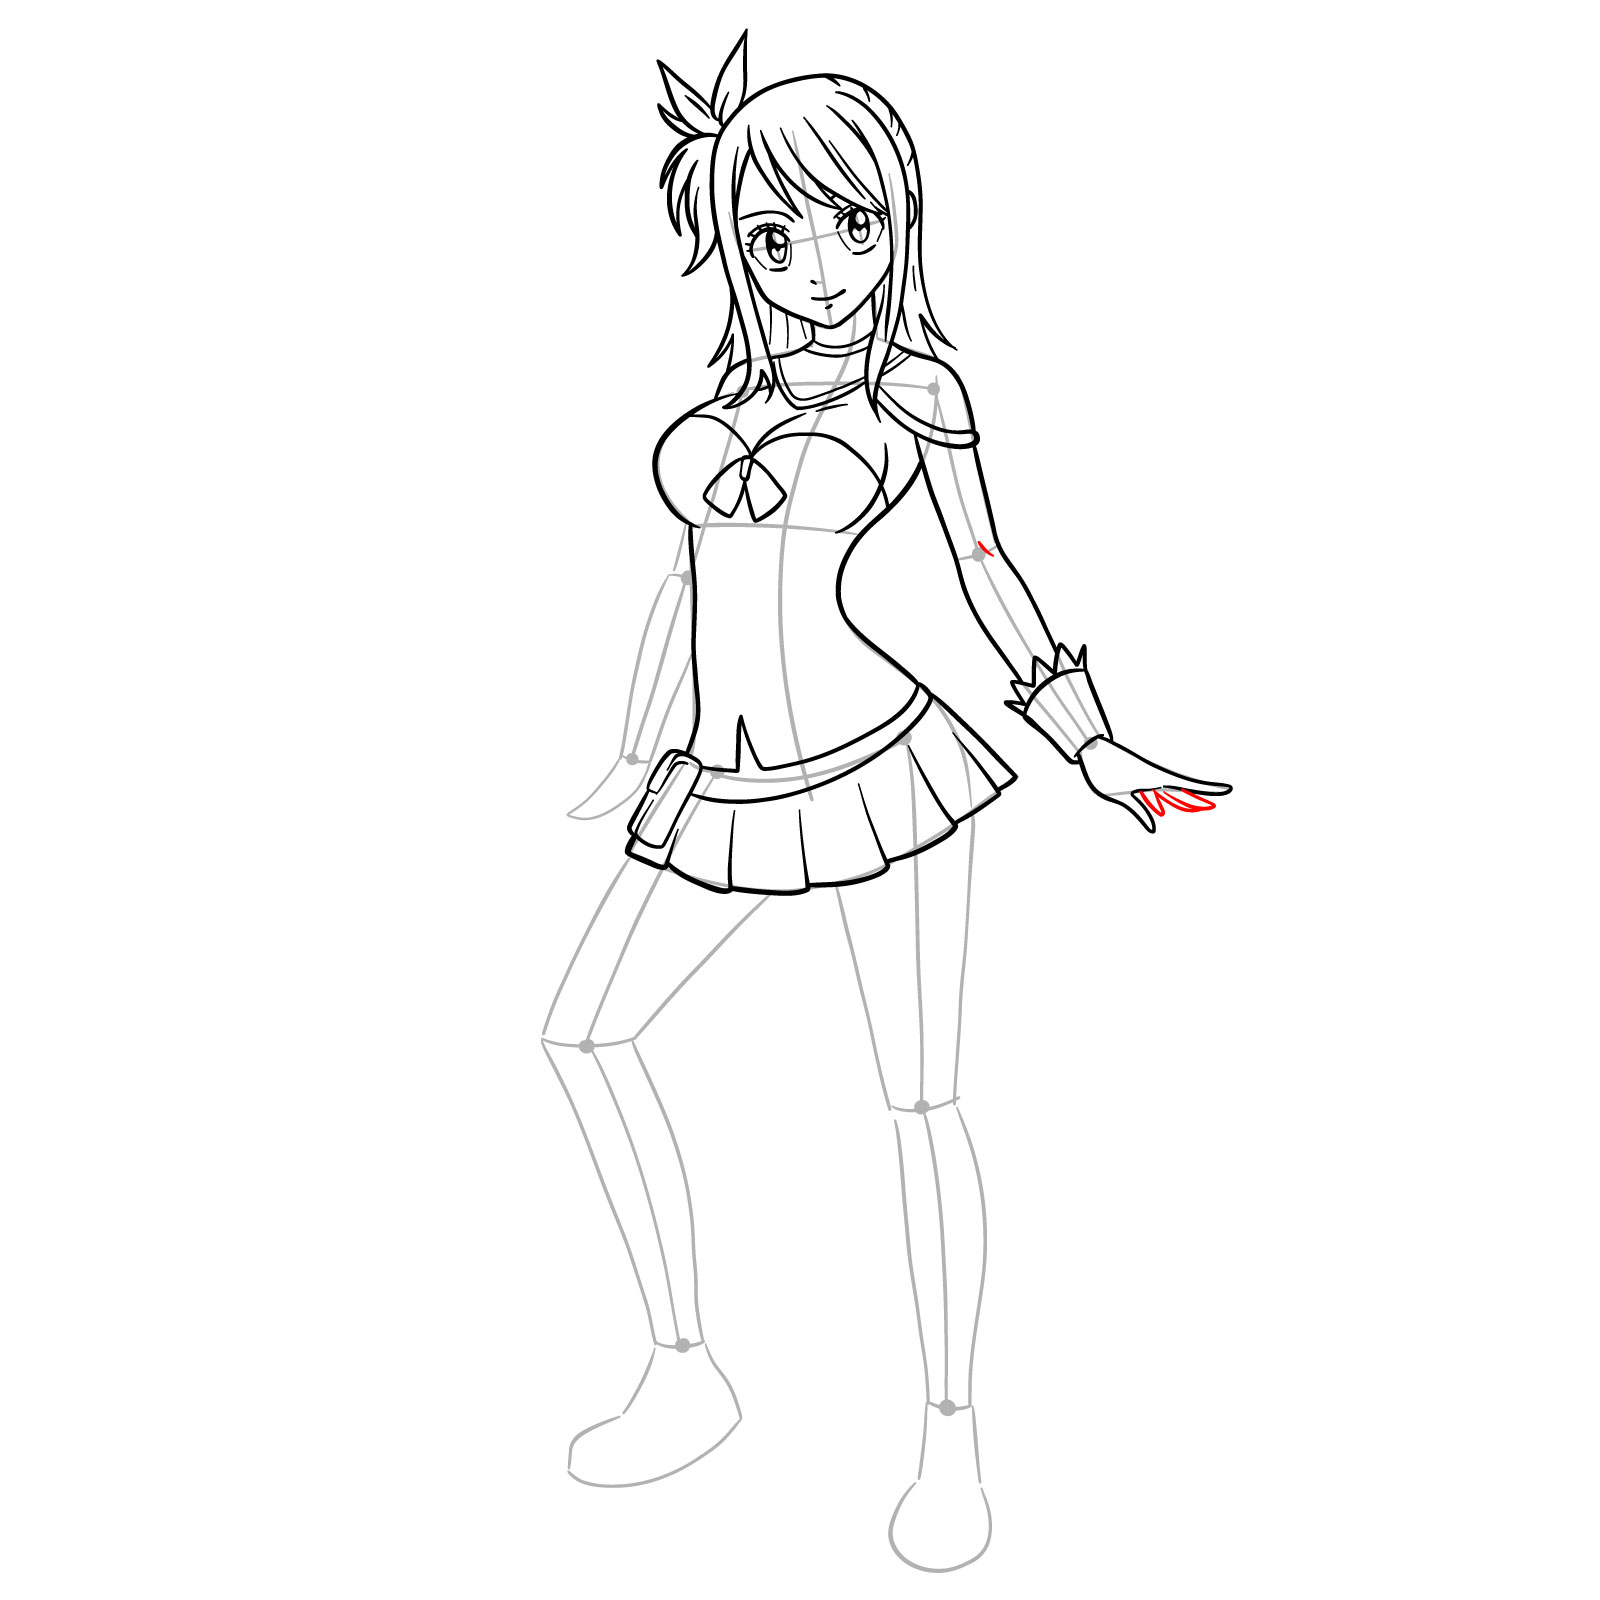 How to draw Lucy Heartfilia in a new outfit - step 23